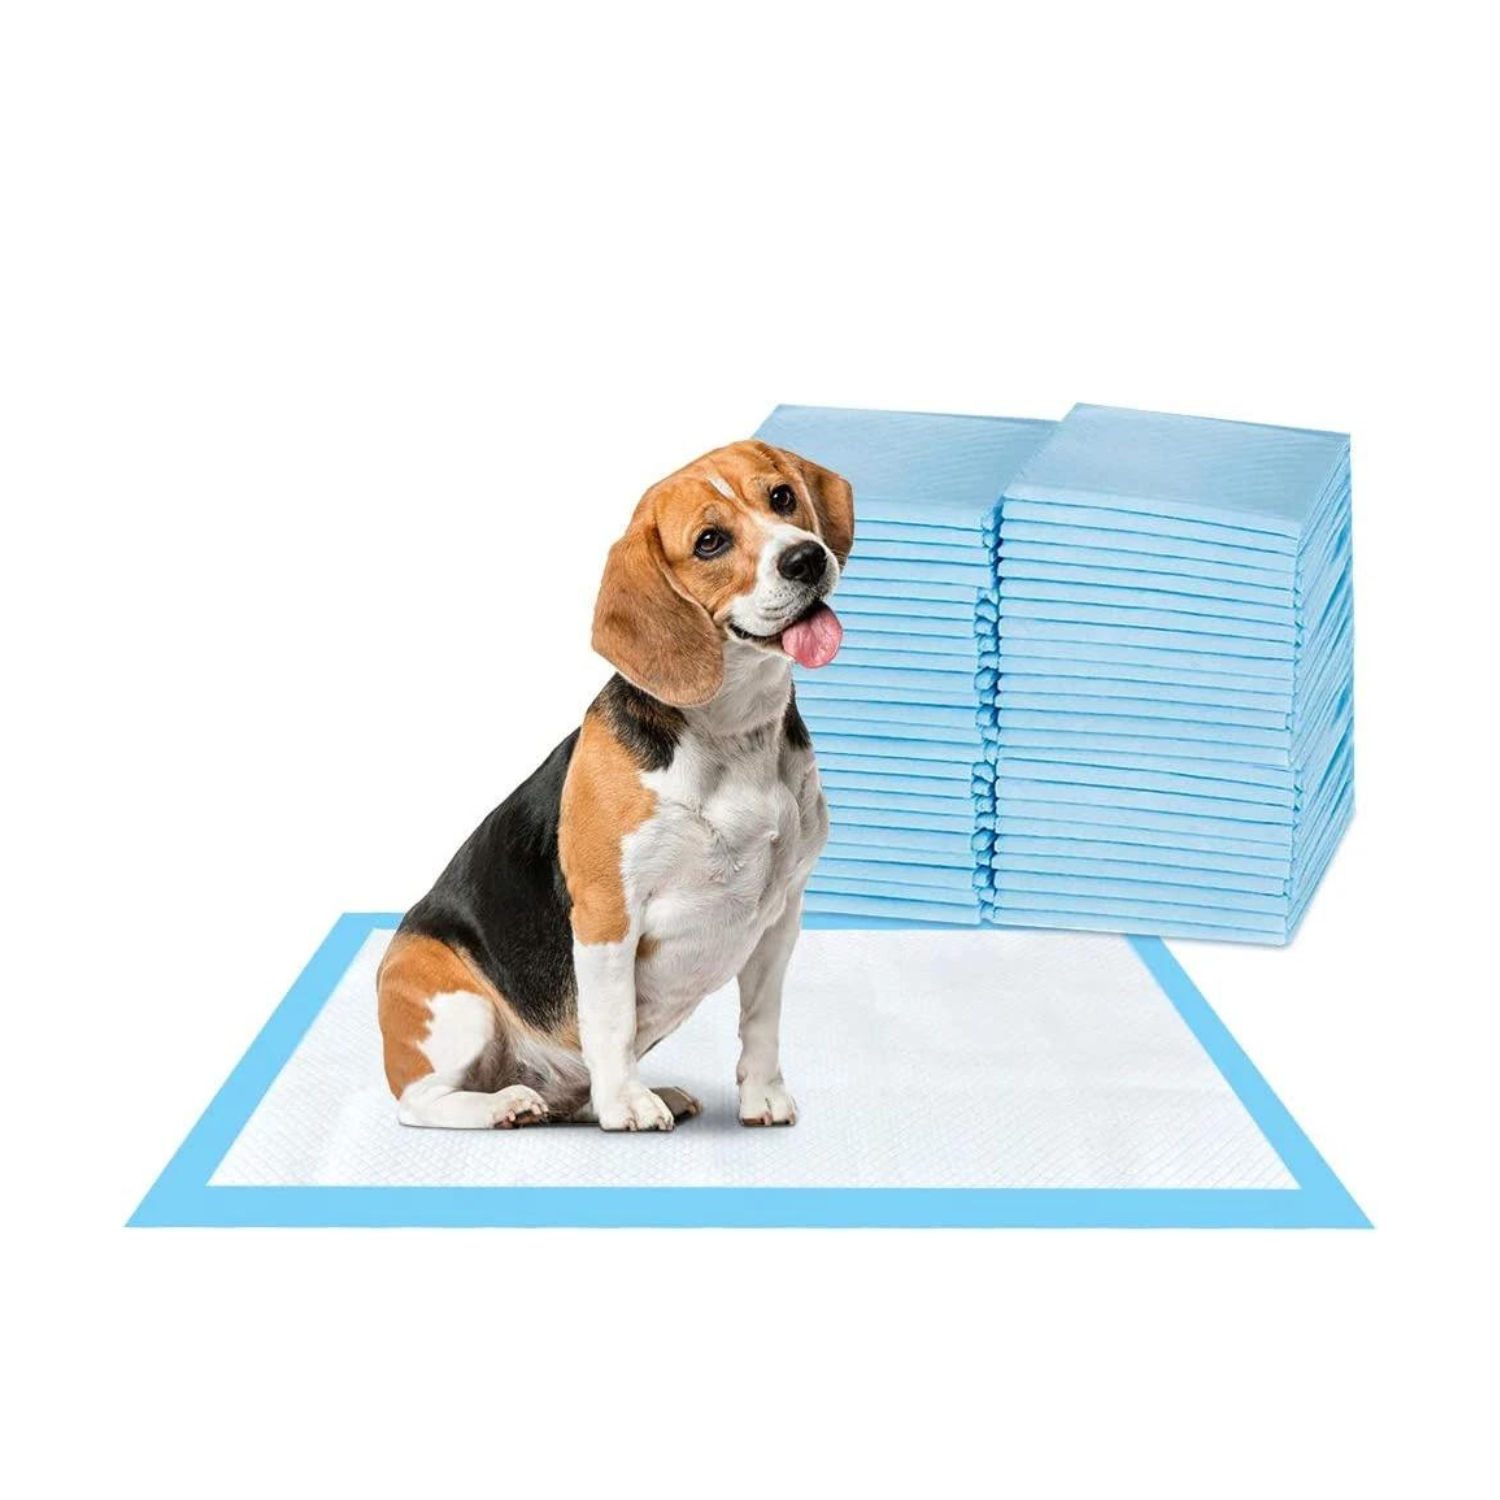 Absorbent Waterproof Dog and Puppy Pet Training Pad